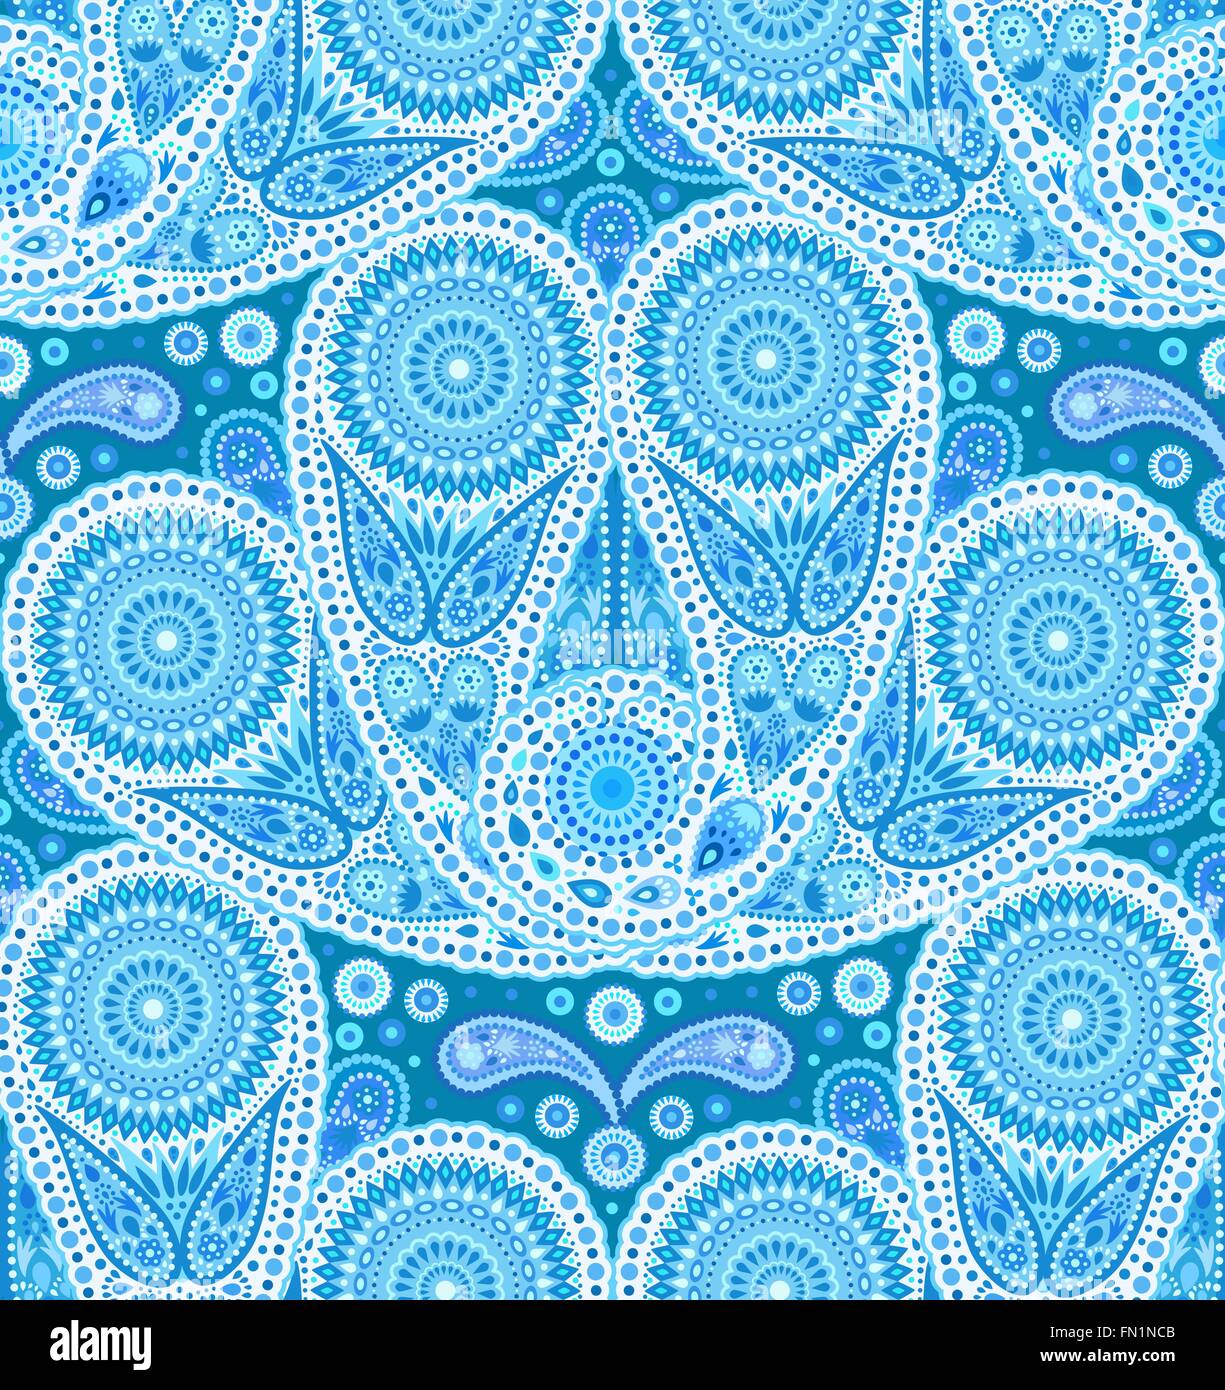 Peacock Tail Paisley Pattern Stock Vector